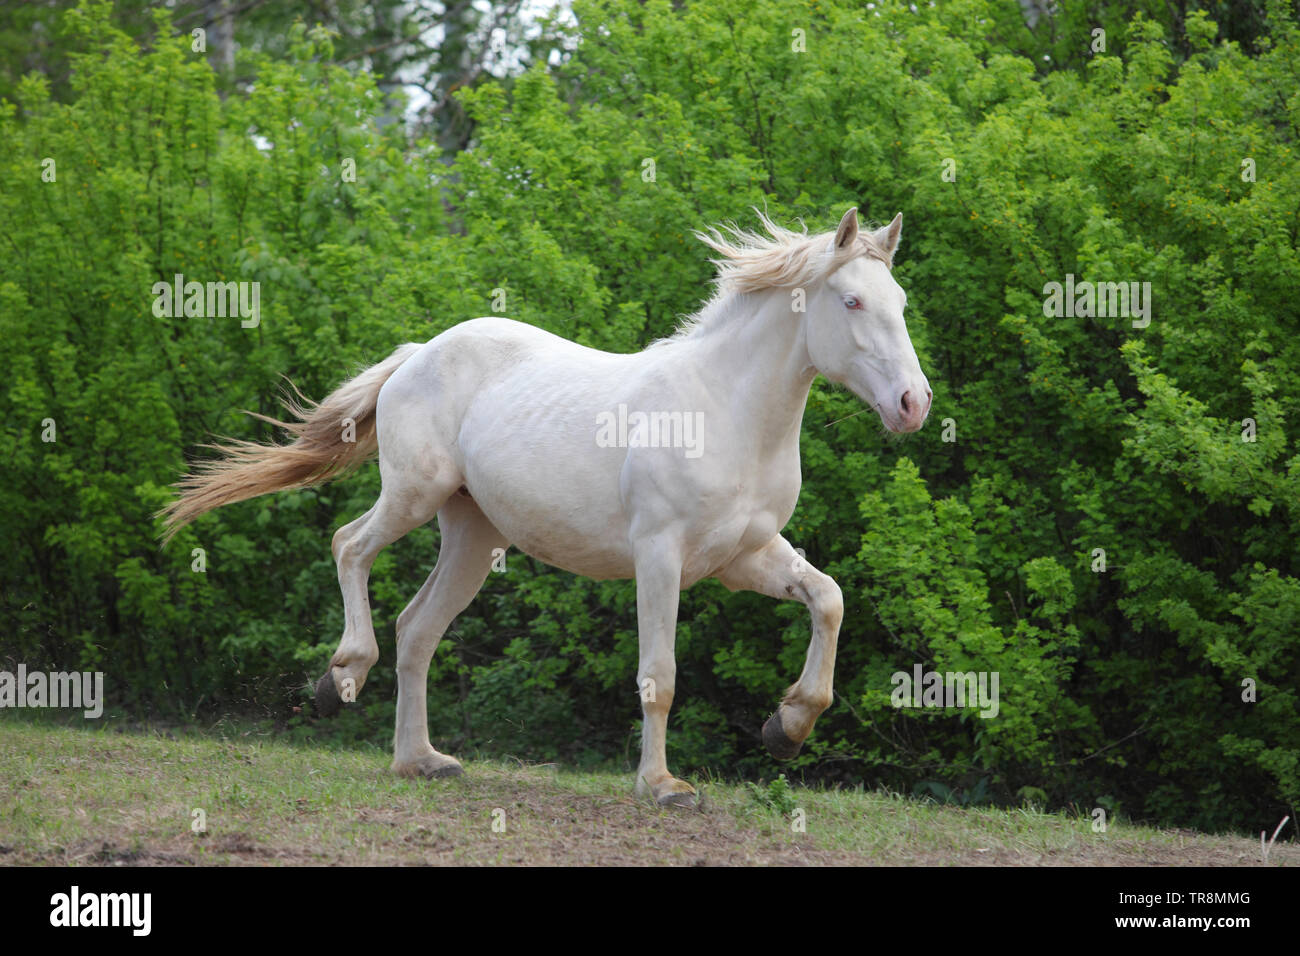 Animal warm blooded cremello horse galloping in nature Stock Photo